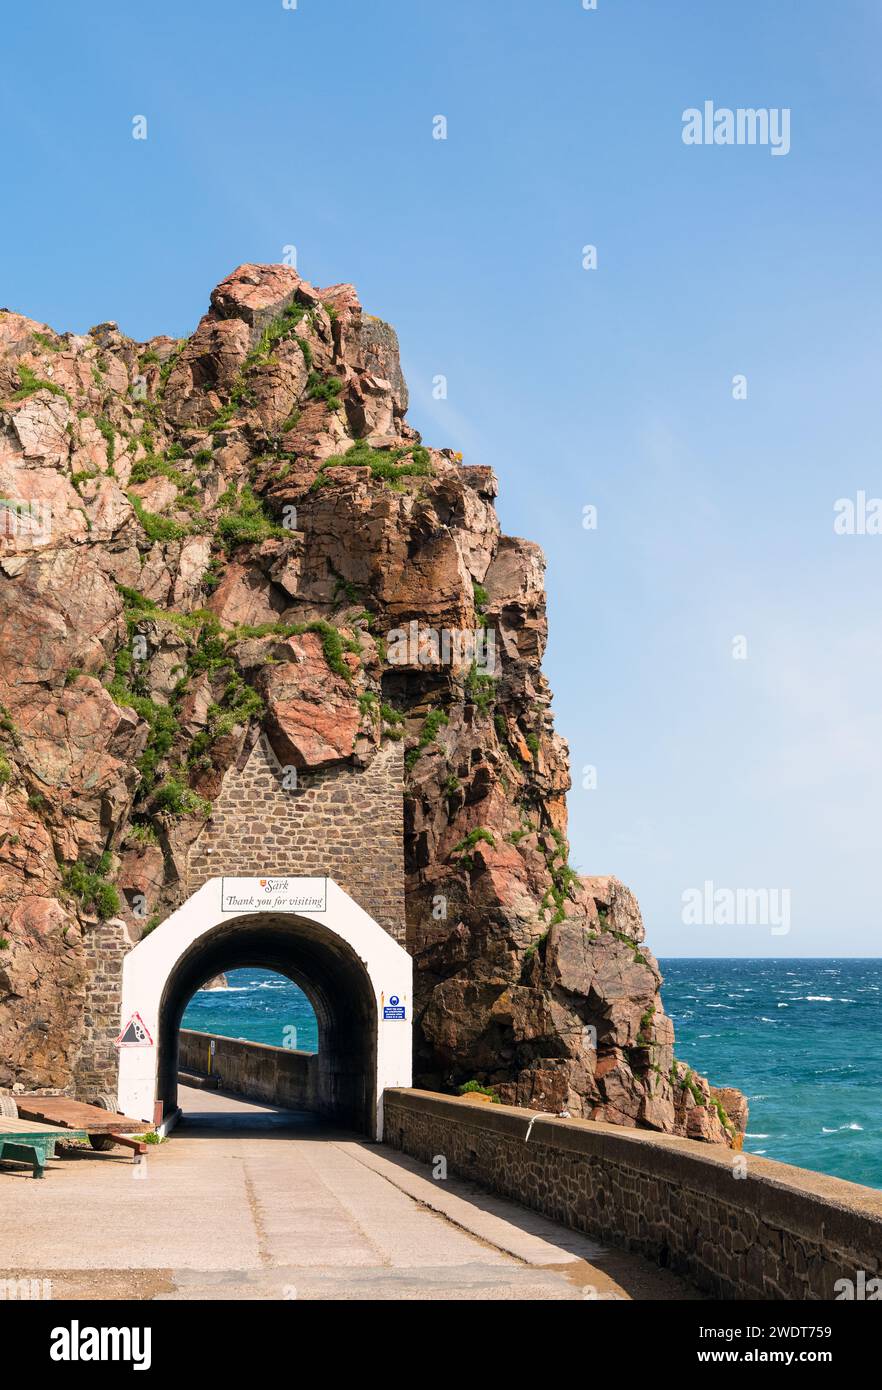 Tunnel entrance to Maseline Harbour, Isle of Sark, Channel Islands, Europe Stock Photo